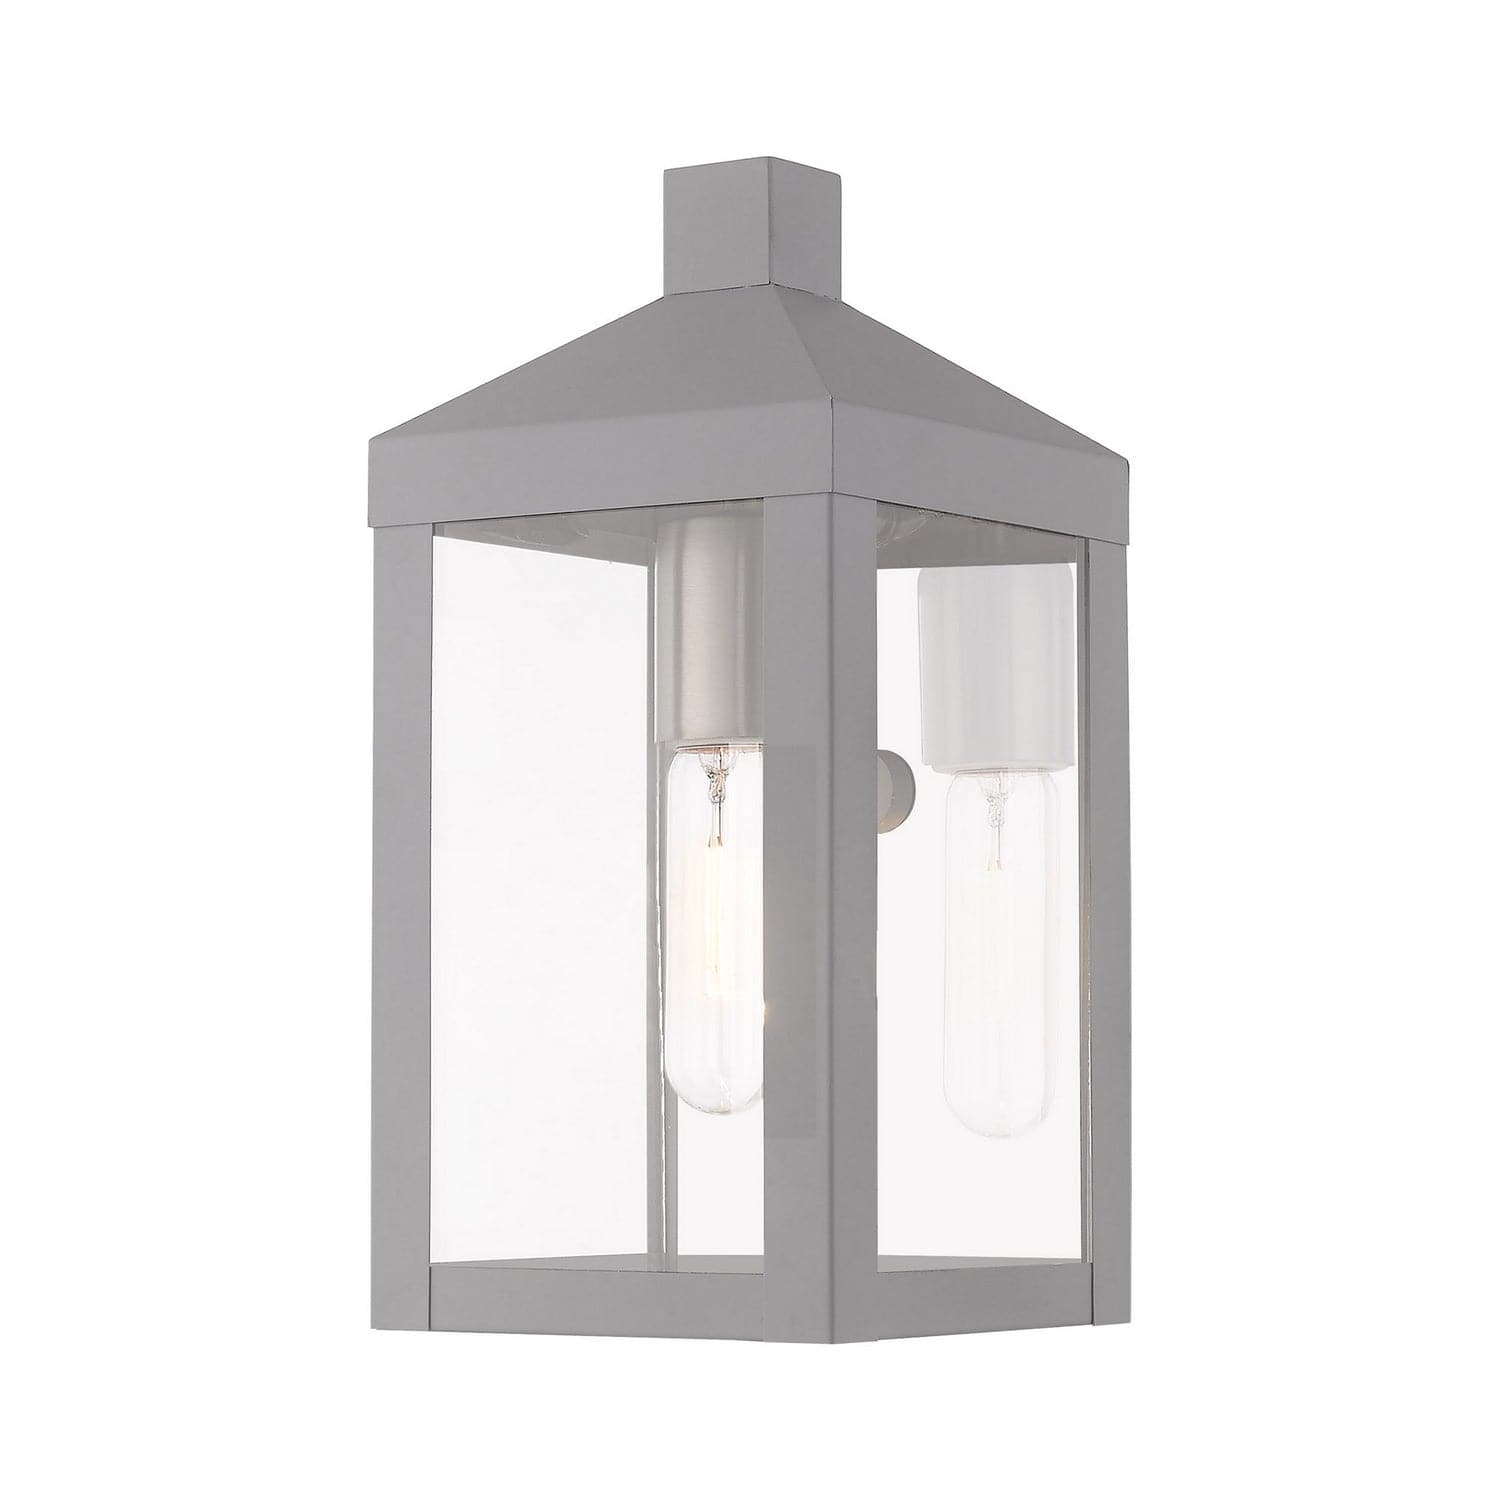 Livex Lighting - 20581-80 - One Light Outdoor Wall Lantern - Nyack - Nordic Gray w/ Brushed Nickels and Polished Chrome Stainless Steel